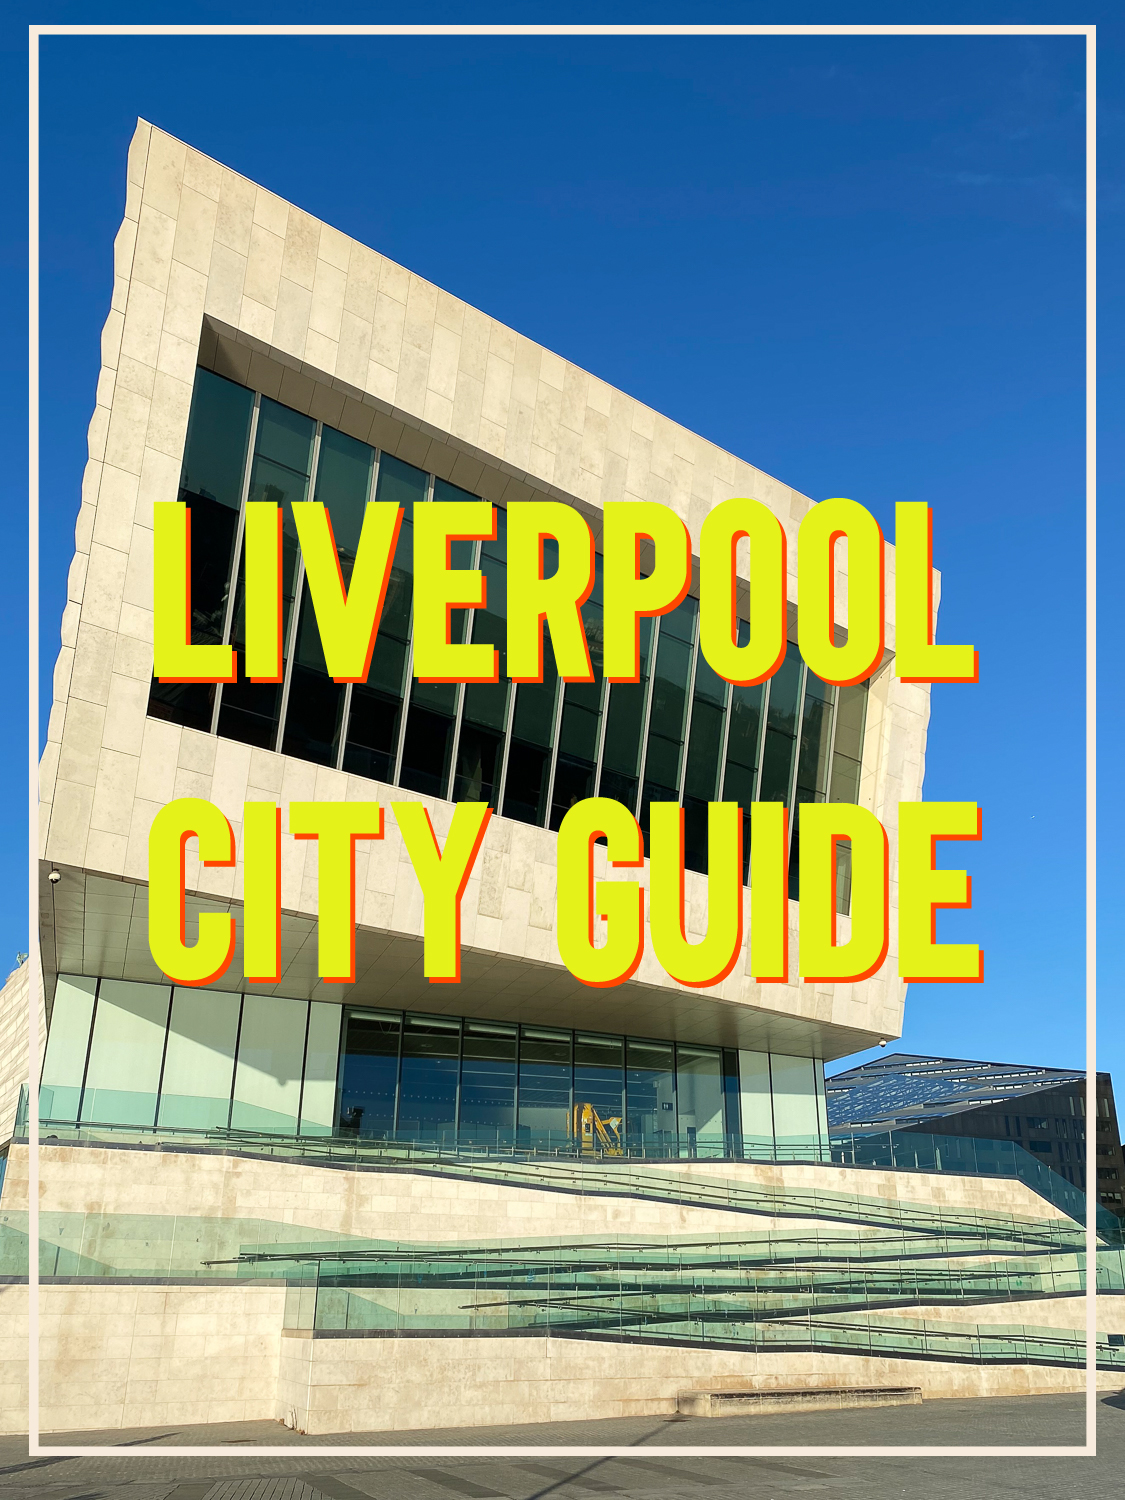 FRUGAL CITY GUIDE: LIVERPOOL